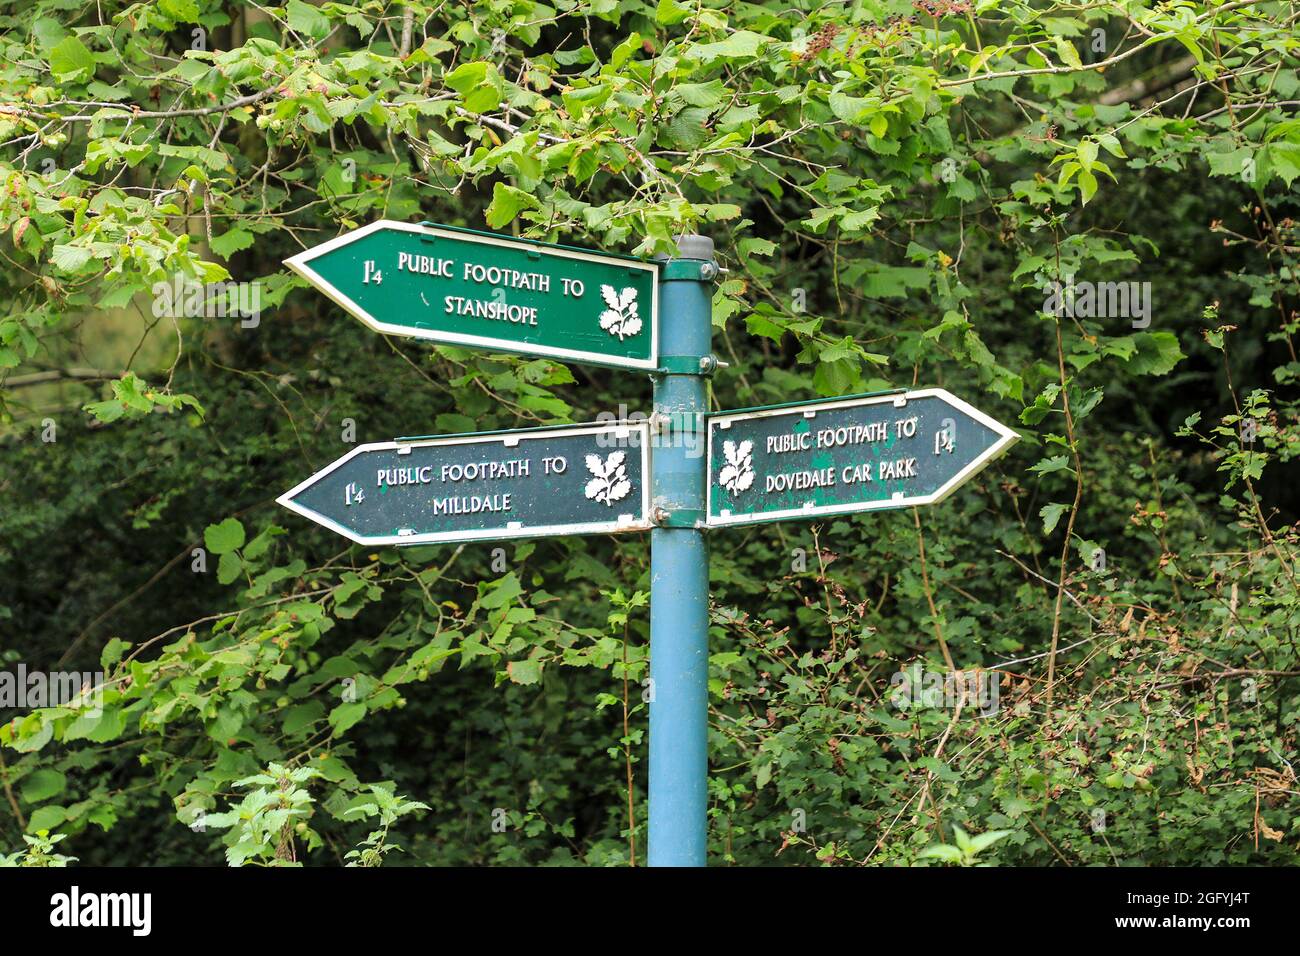 A metal public footpath sign post with public footpaths to Stanshope, Milldale and Dovedale, Staffordshire, England, UK Stock Photo